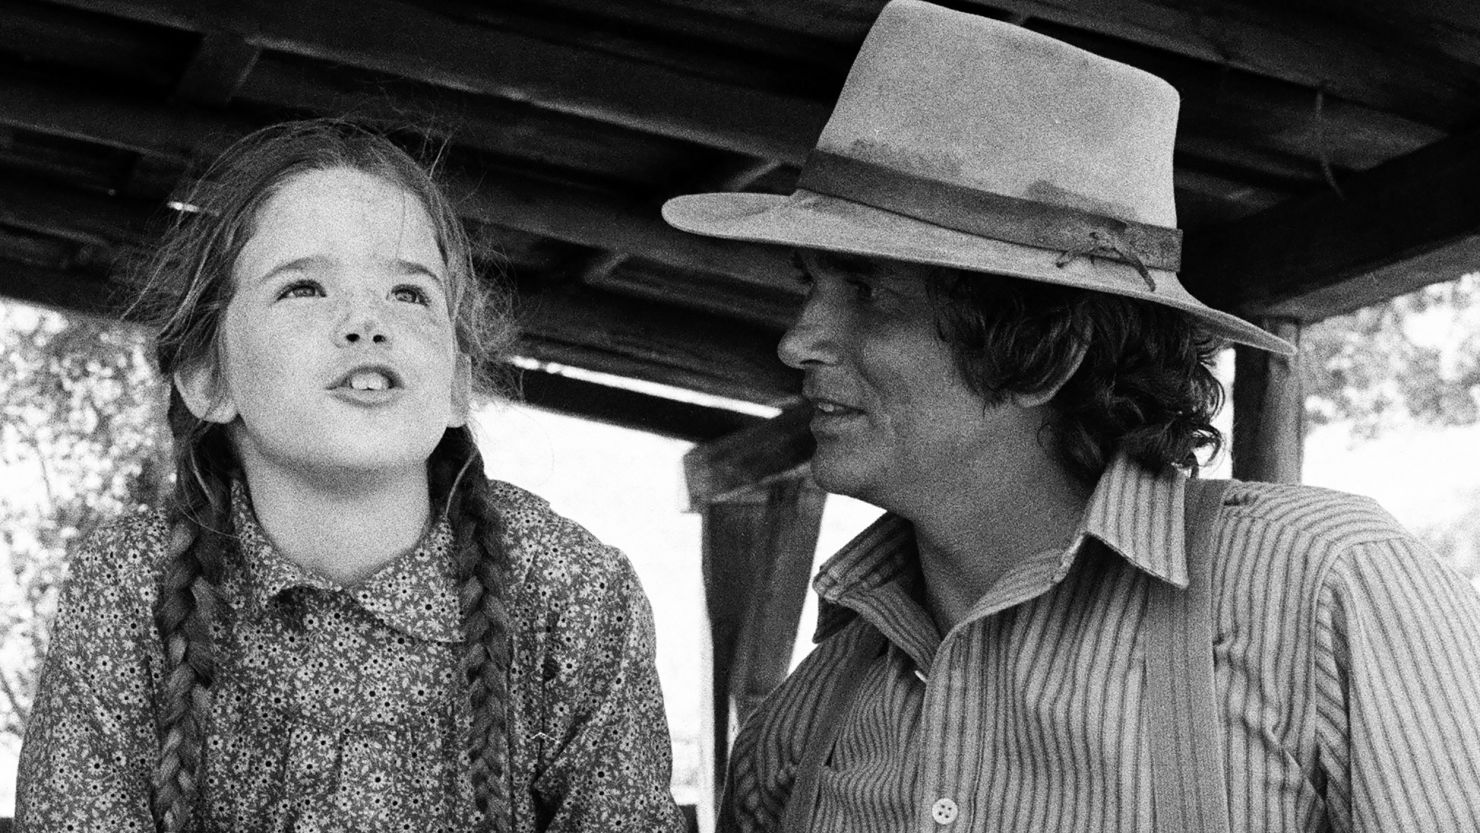 LITTLE HOUSE ON THE PRAIRIE -- Season 1 -- Pictured: (l-r) Melissa Gilbert as Laura Ingalls Wilder, Michael Landon as Charles Philip Ingalls  (Photo by NBCU Photo Bank/NBCUniversal via Getty Images via Getty Images)